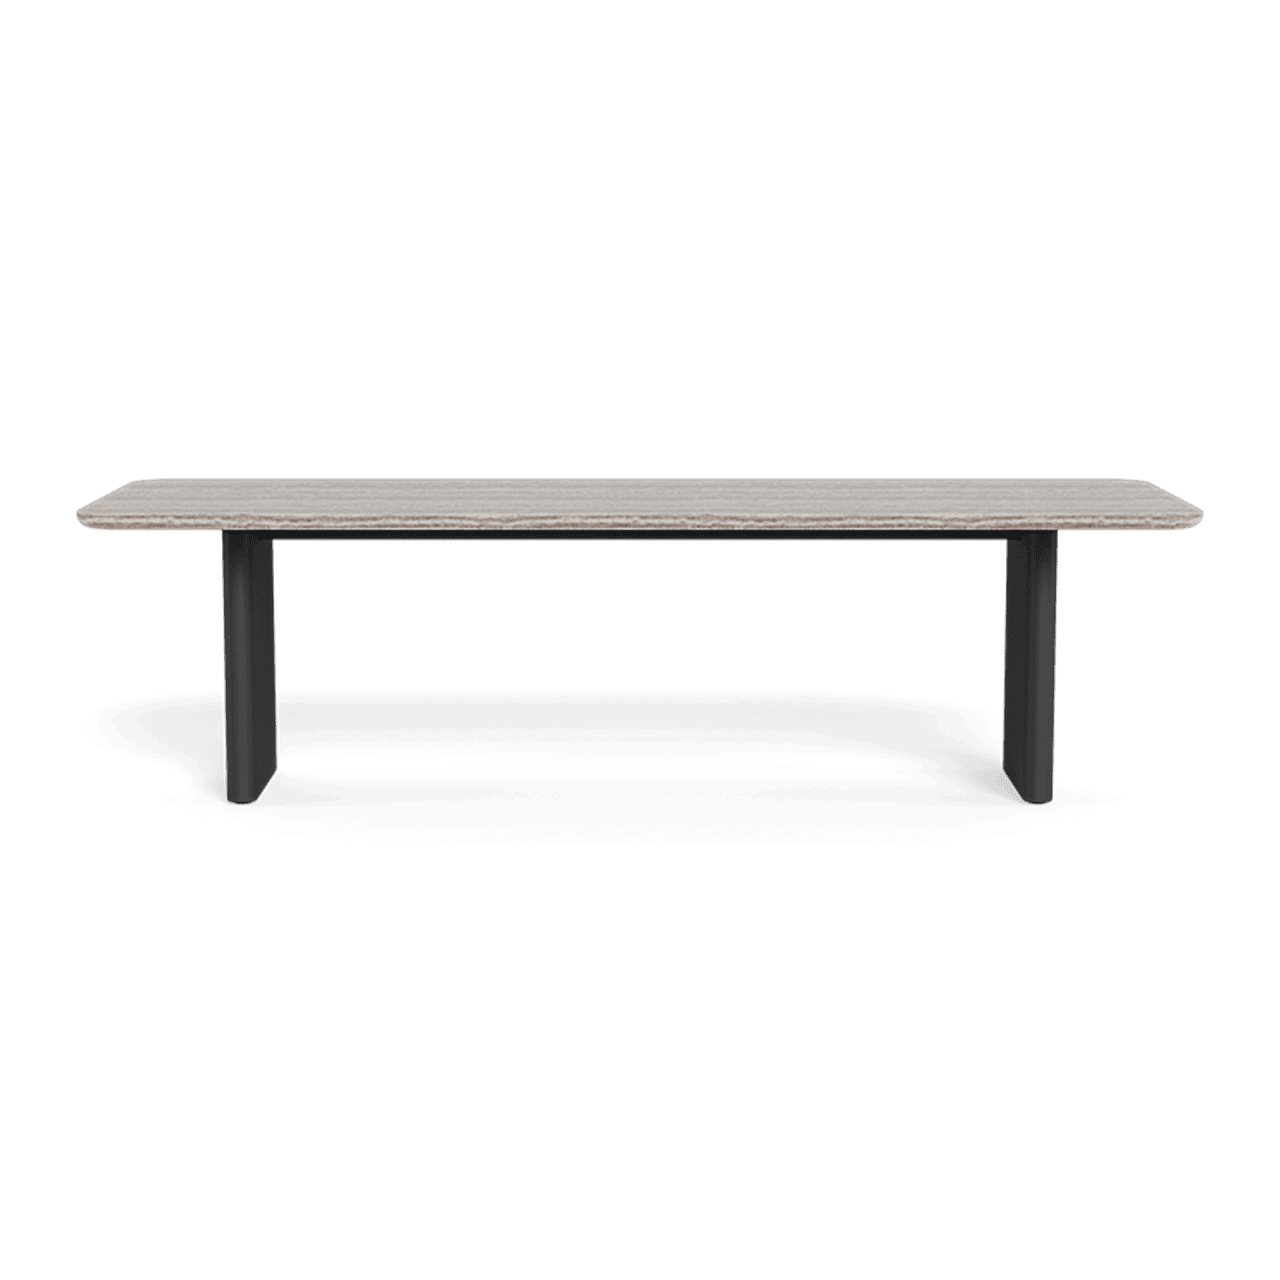 Victoria Dining Table 108" - Aluminum Frame